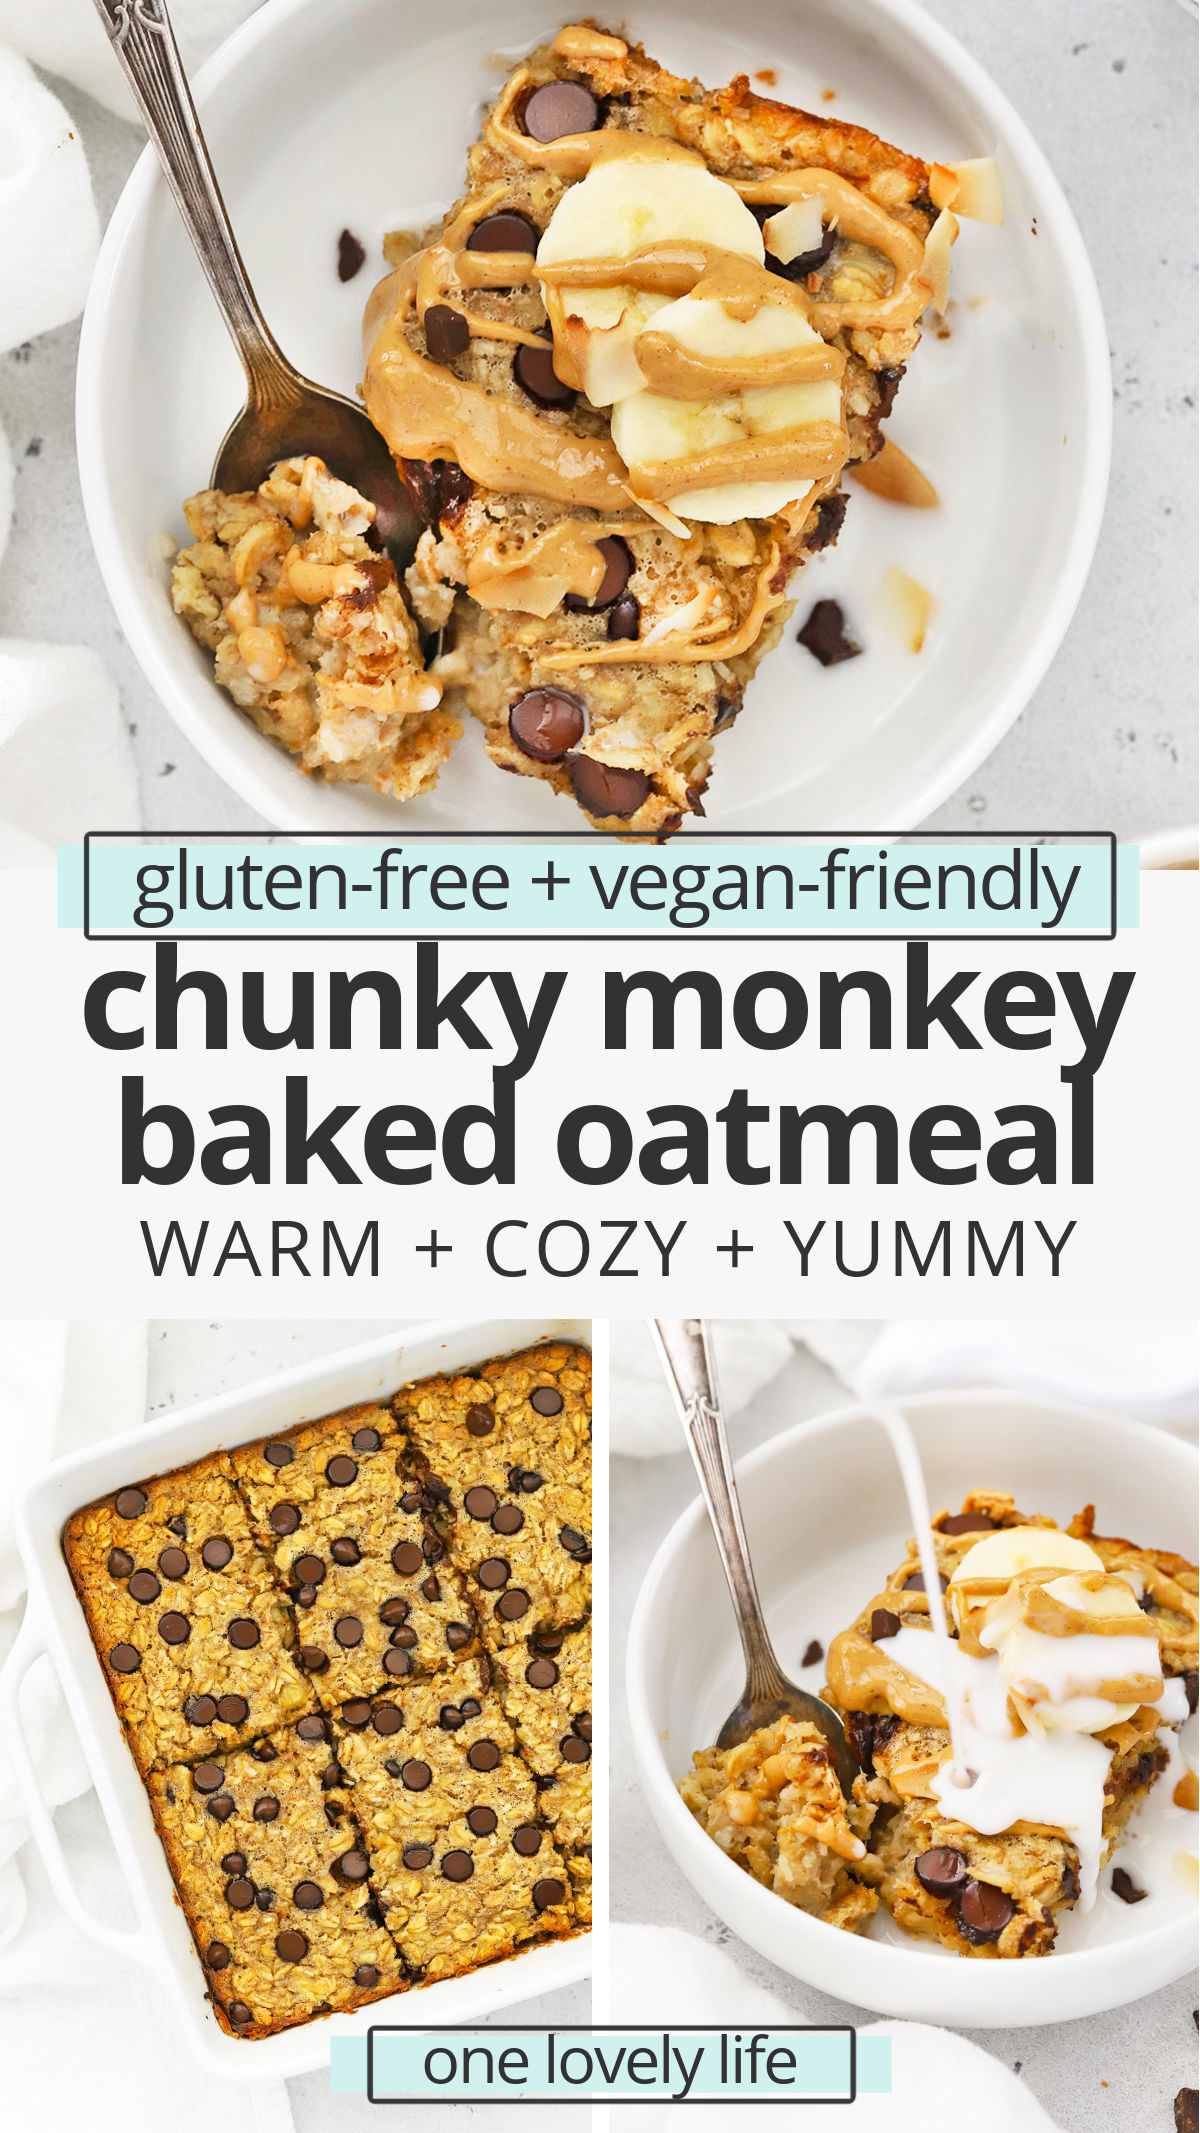 Chunky Monkey Baked Oatmeal - This peanut butter banana baked oatmeal is loaded with goodies like coconut and chocolate chips to make any morning feel special. (Gluten-Free, Vegan-Friendly) // Peanut Butter Banana Baked Oatmeal Recipe // Healthy Baked Oatmeal // Healthy Breakfast #bakedoatmeal #glutenfree #chunkymonkey #oatmeal #healthybreakfast